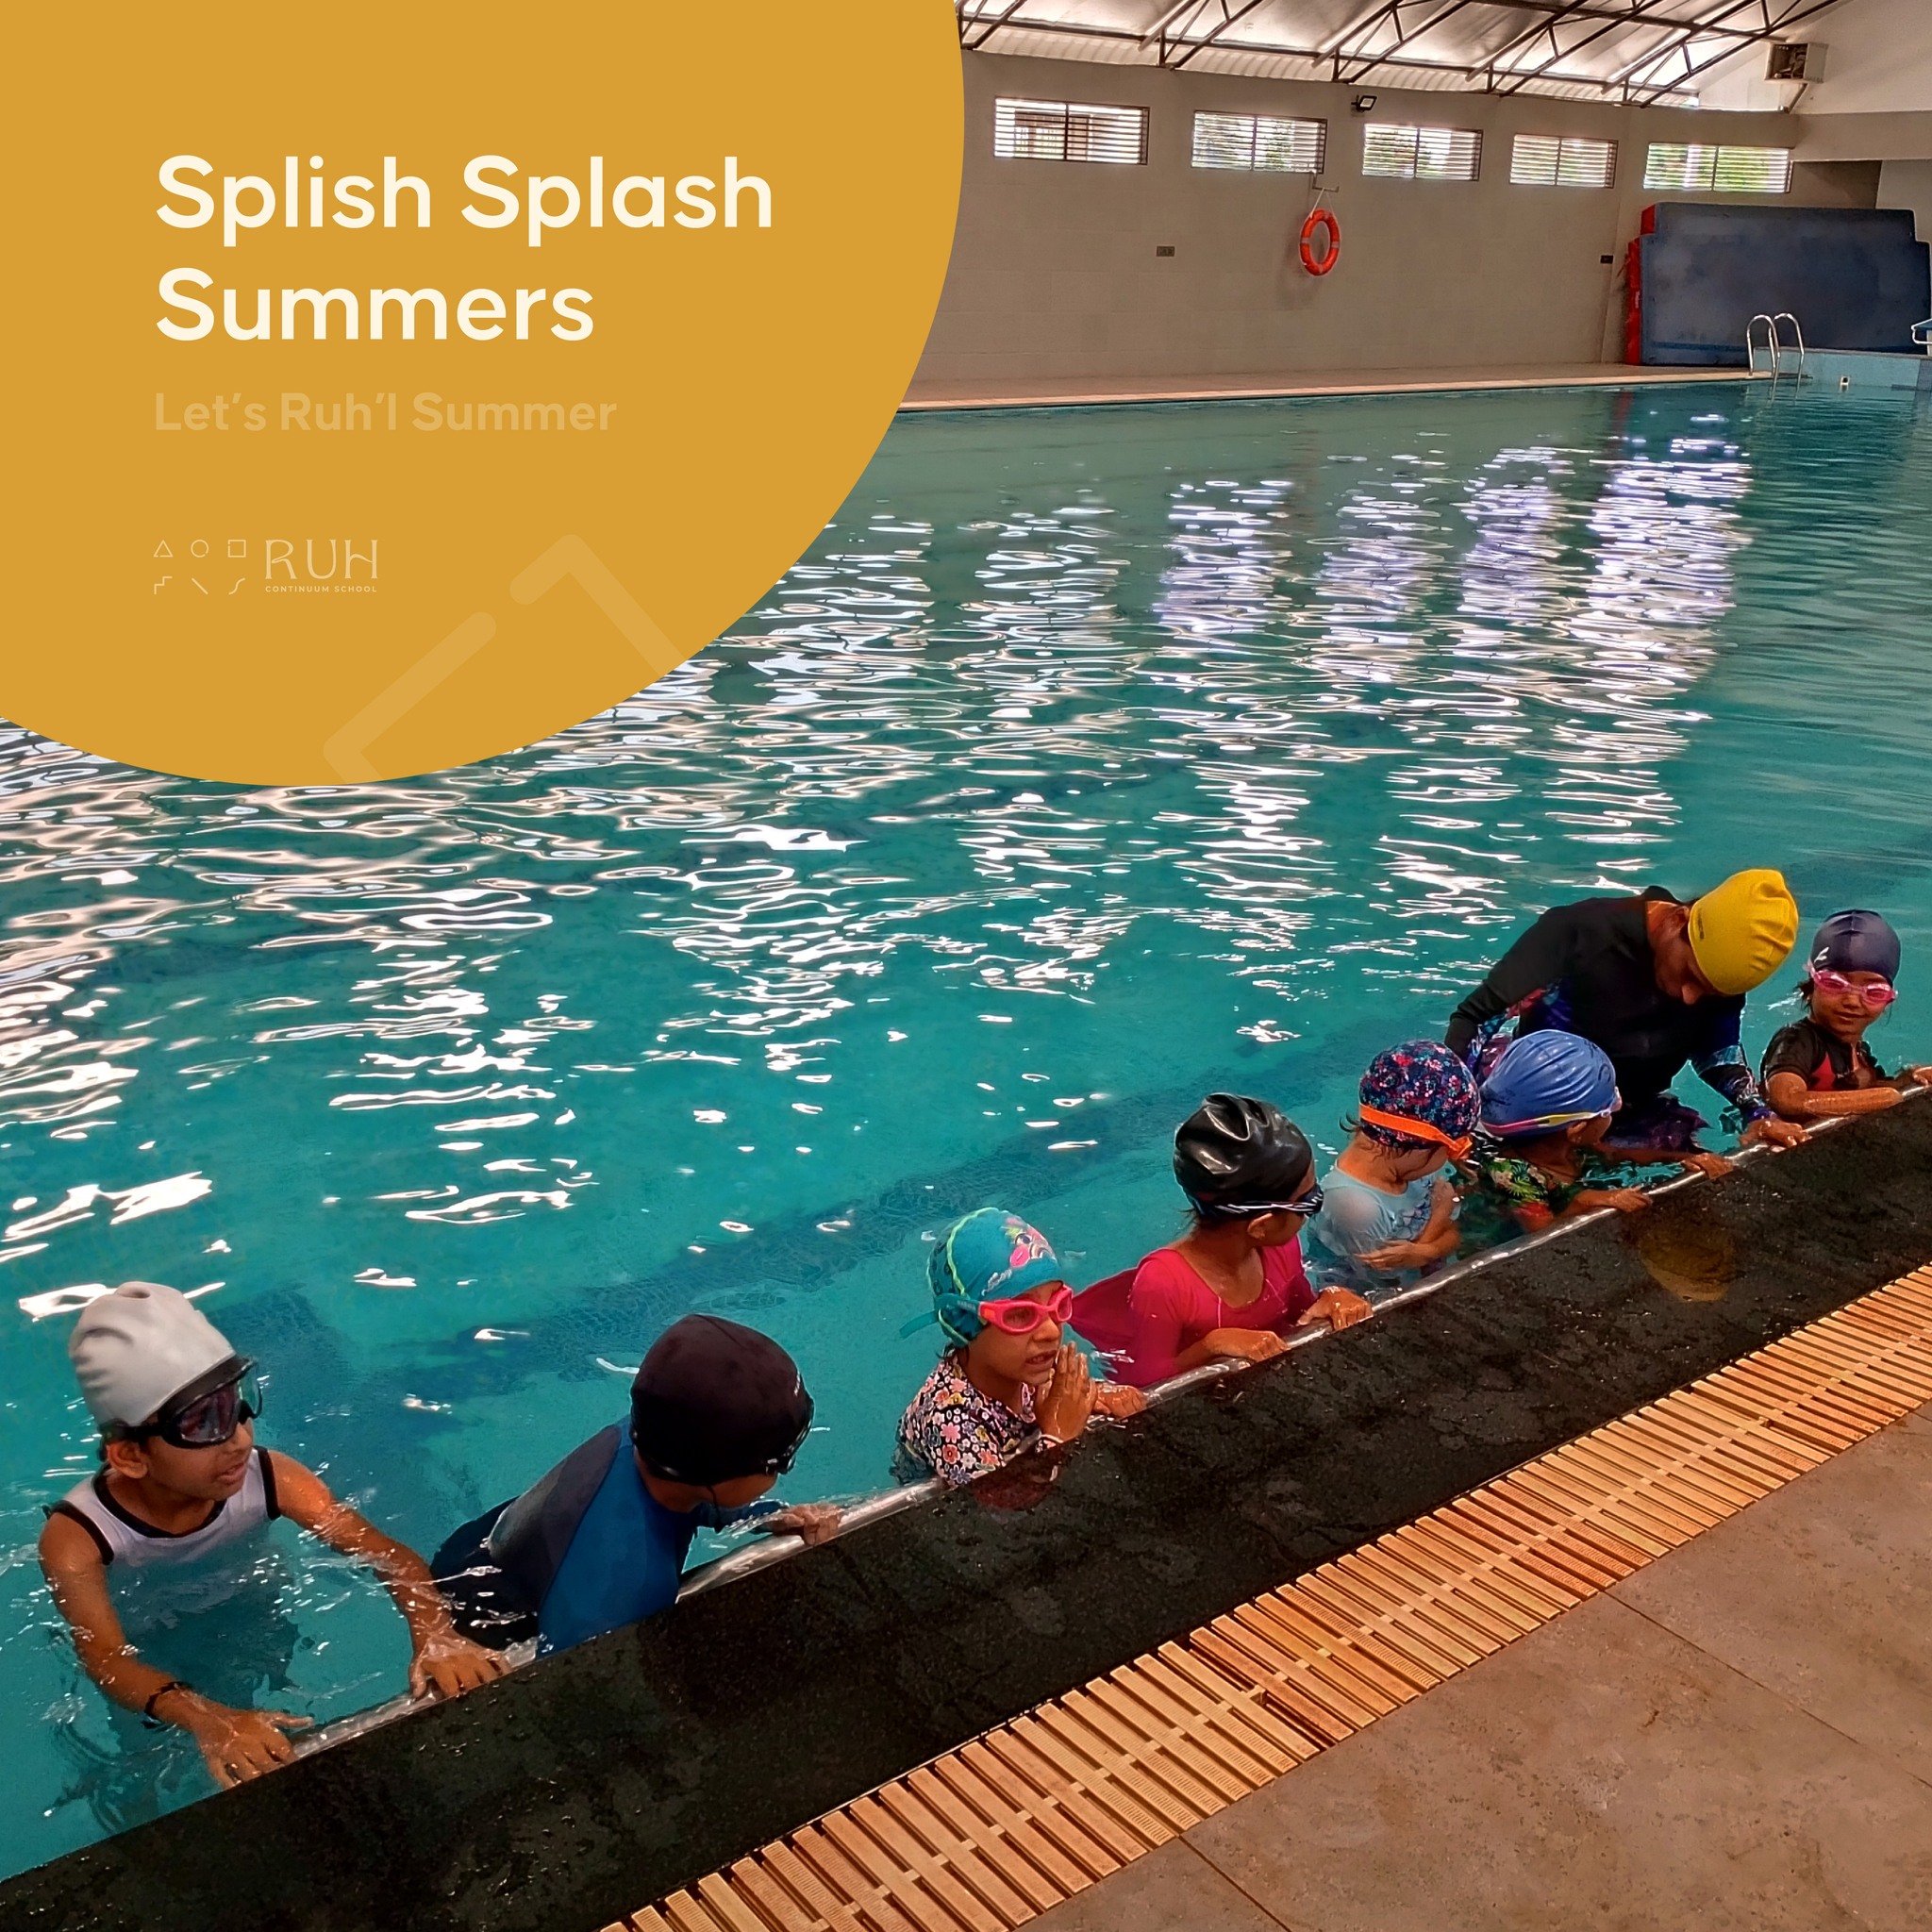 Summer days are made for making a splash! With goggles on and smiles wide, our young swimmers are making waves in the pool this summer🏊&zwj;♀️✨

#ruhcontinuumschool #swimming #summerbreak #summercamp